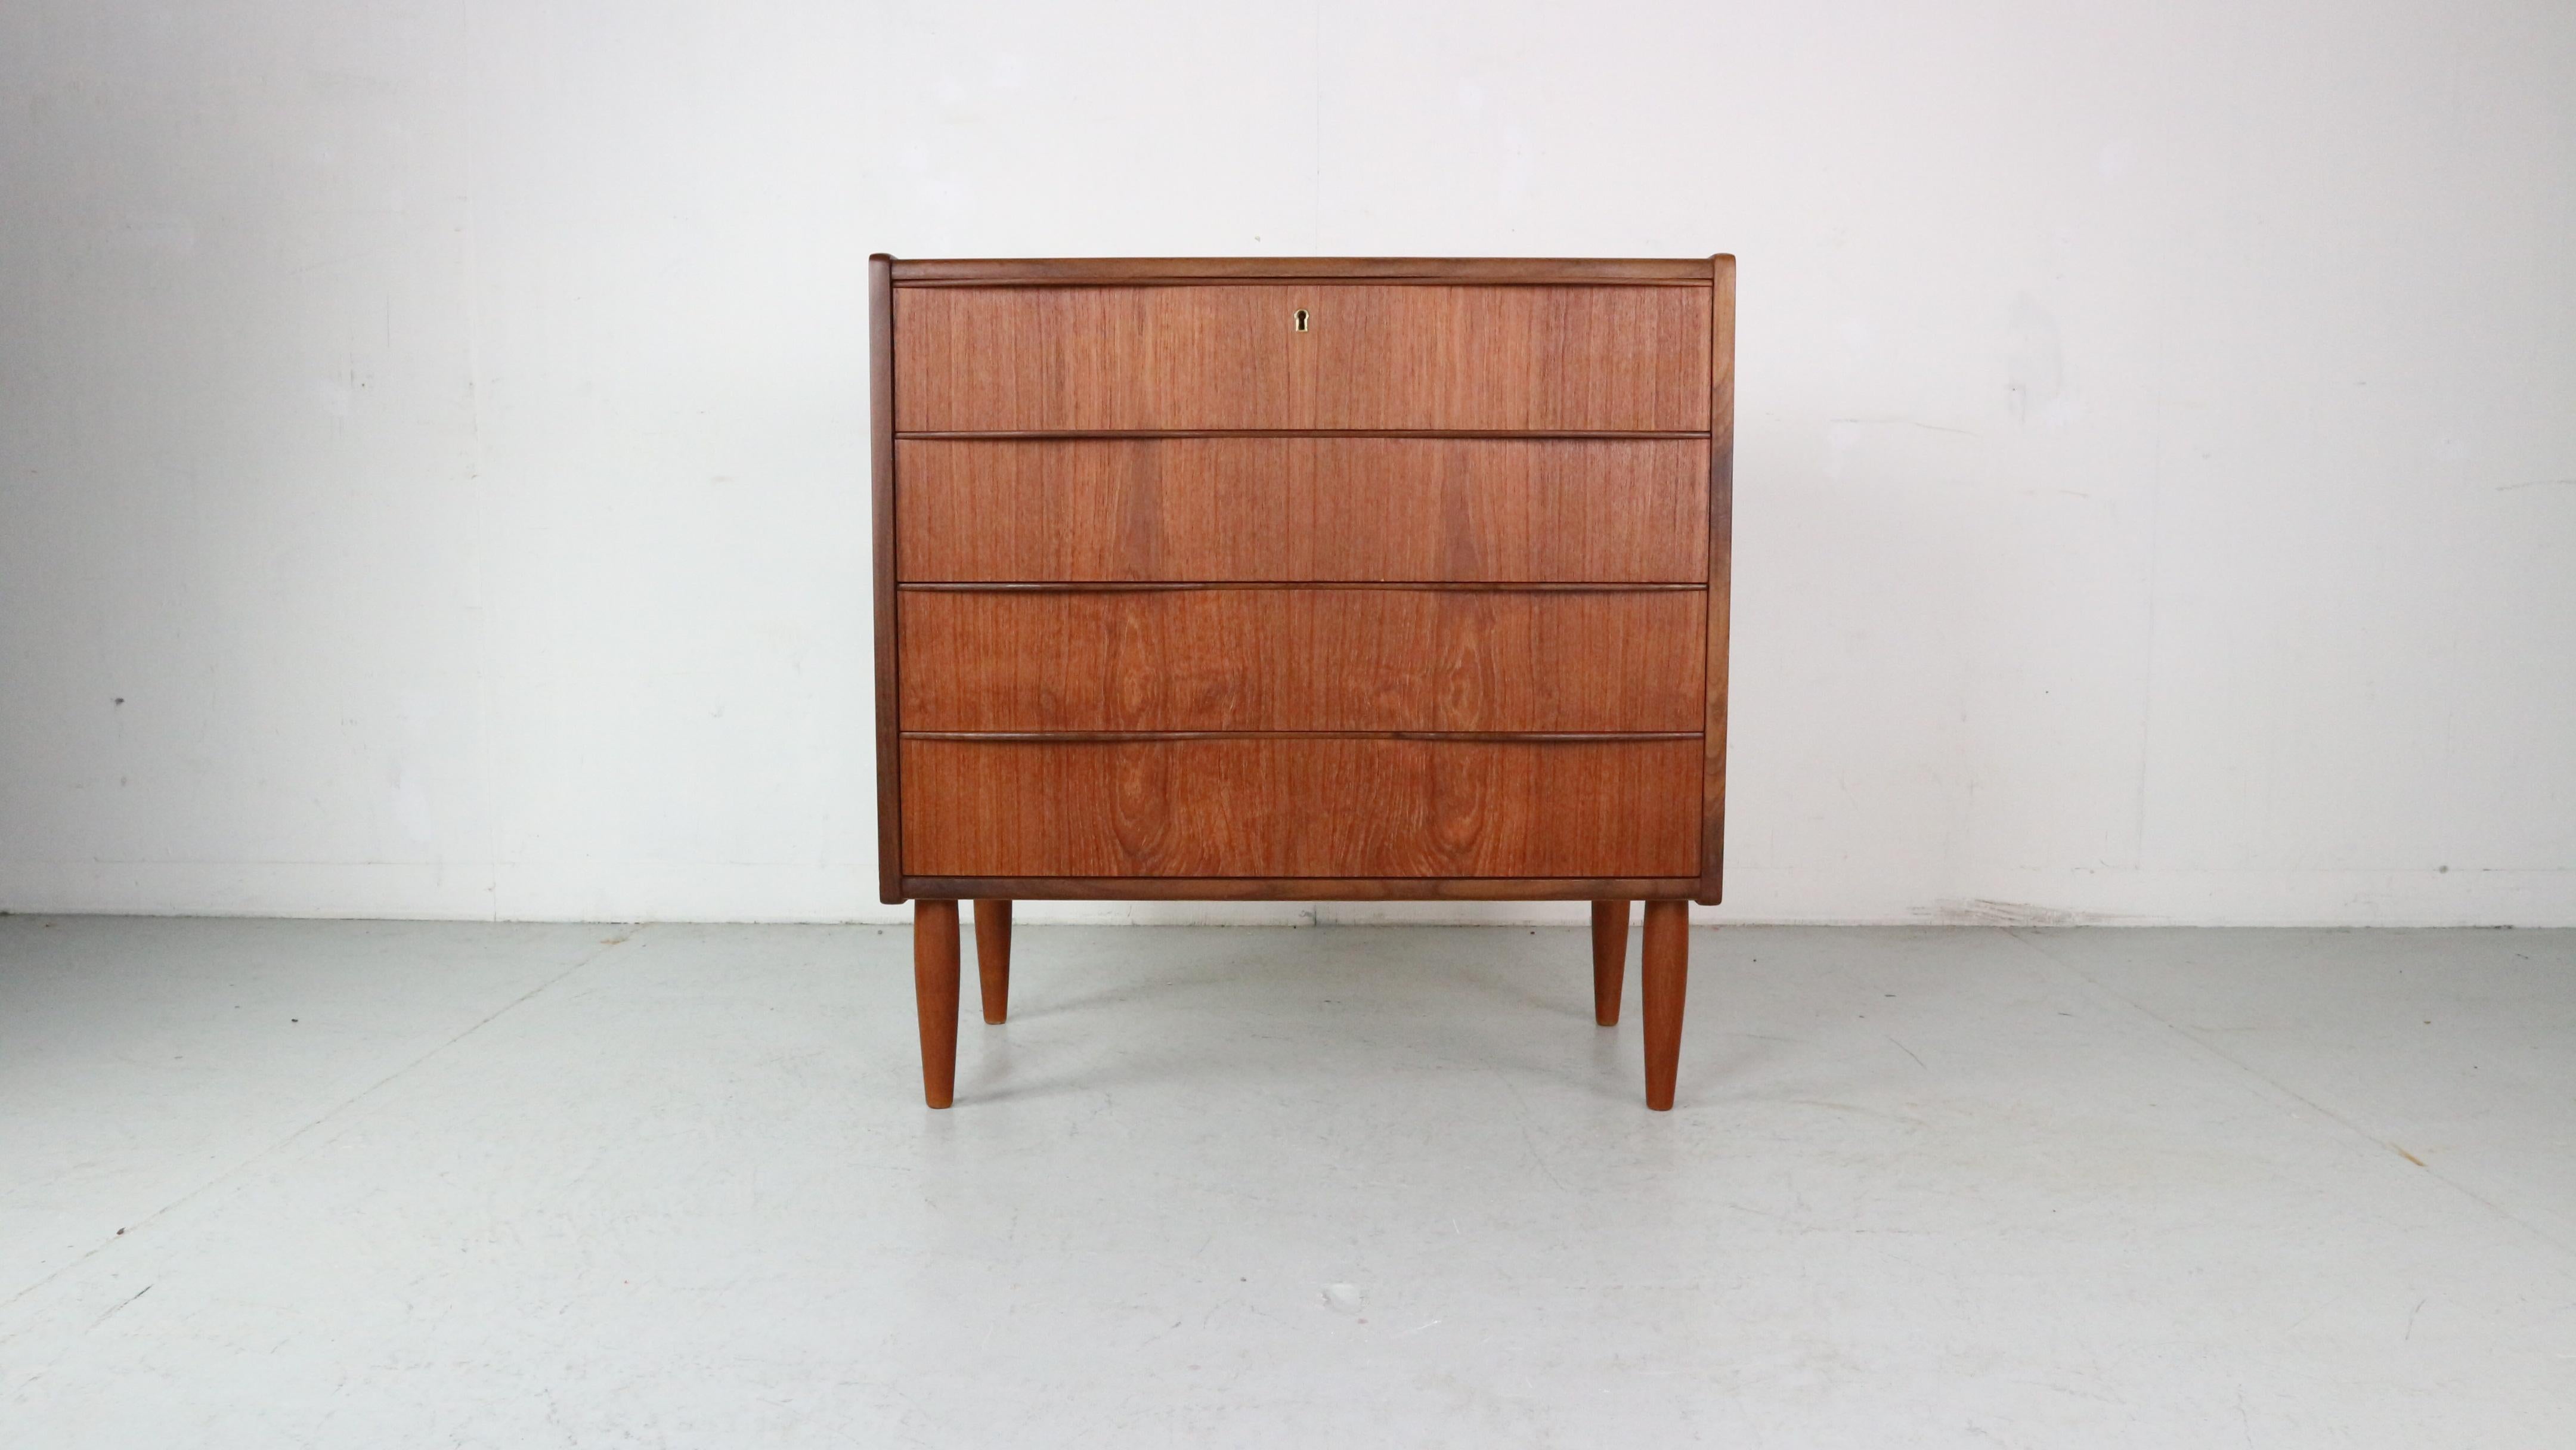 Mid- Century modern period chest of 4 drawers or tallboy cabinet made in 1960's Denmark.

Made of teak wood veneer. Elegant handles and good working drawers.
High quality Danish furniture.

The cabinet is in a good vintage condition.
It has been